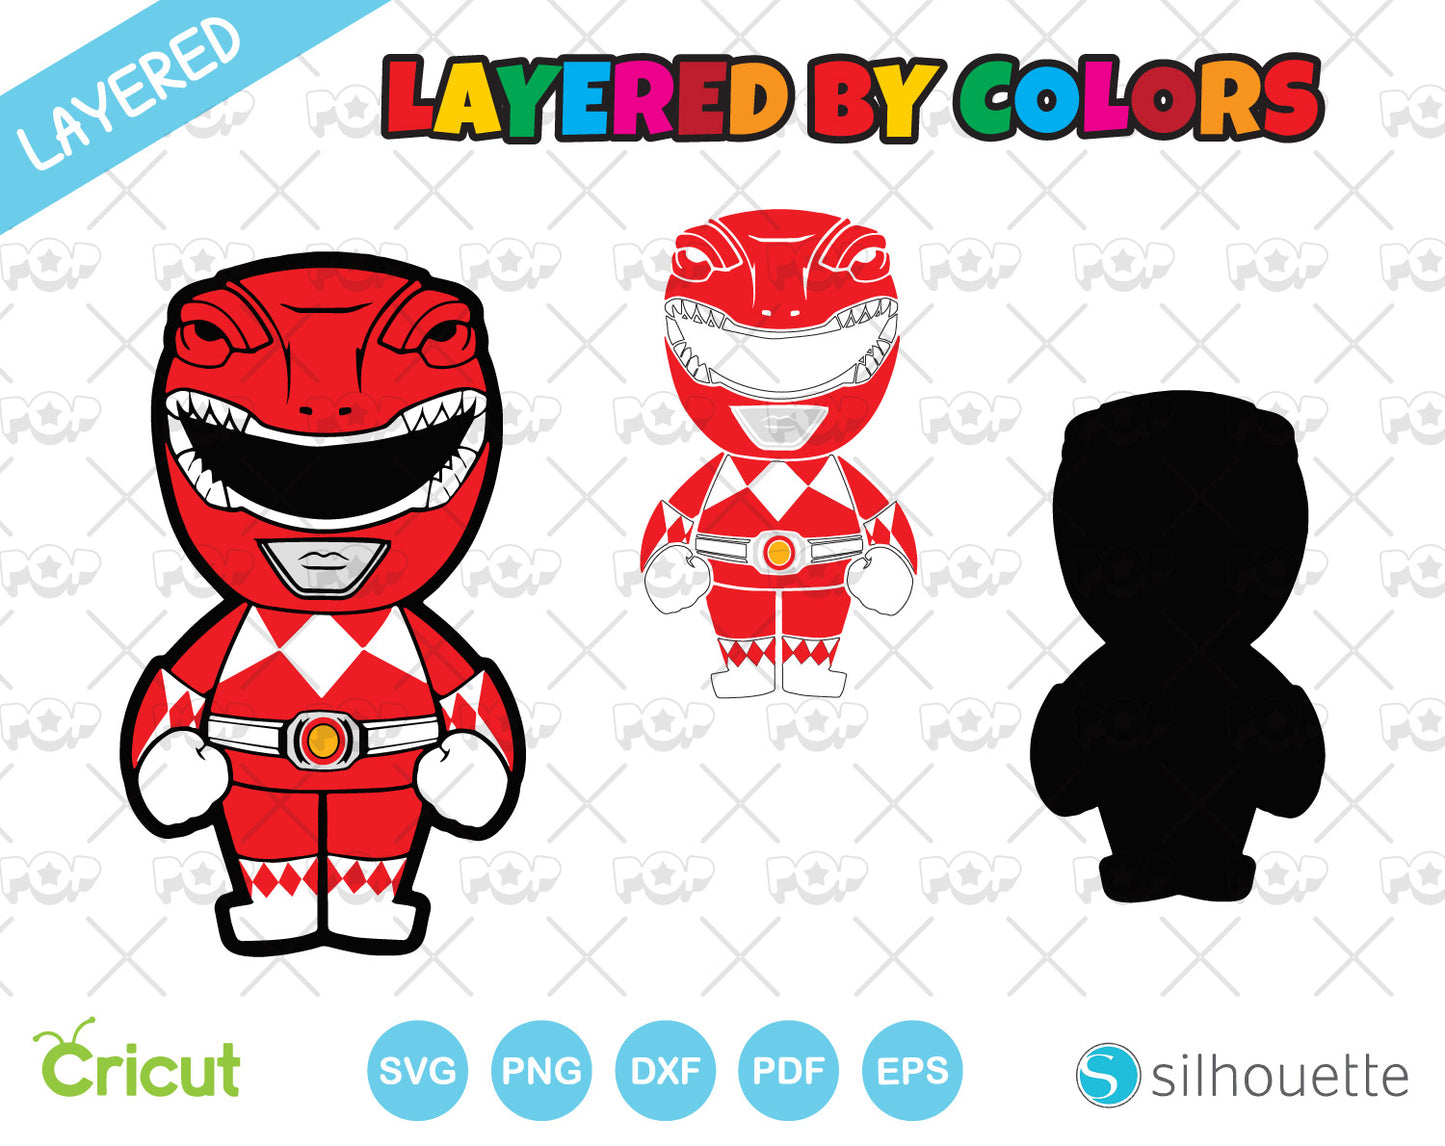 Mighty Morphin Power Rangers clipart bundle, SVG cut files for Cricut / Silhouette, PNG, DXF, instant download